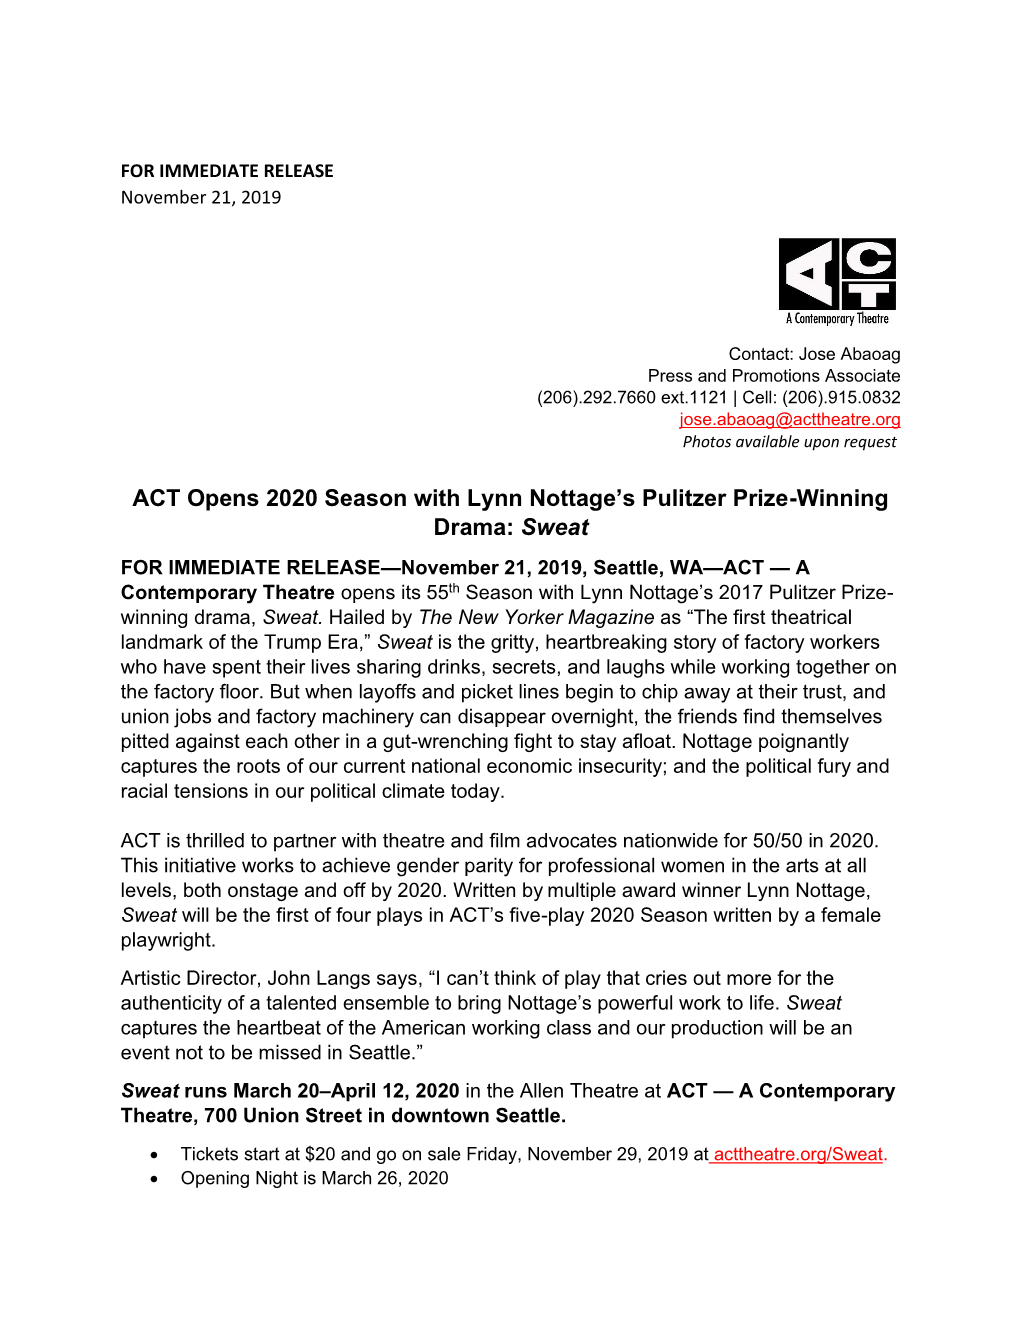 ACT Opens 2020 Season with Lynn Nottage's Pulitzer